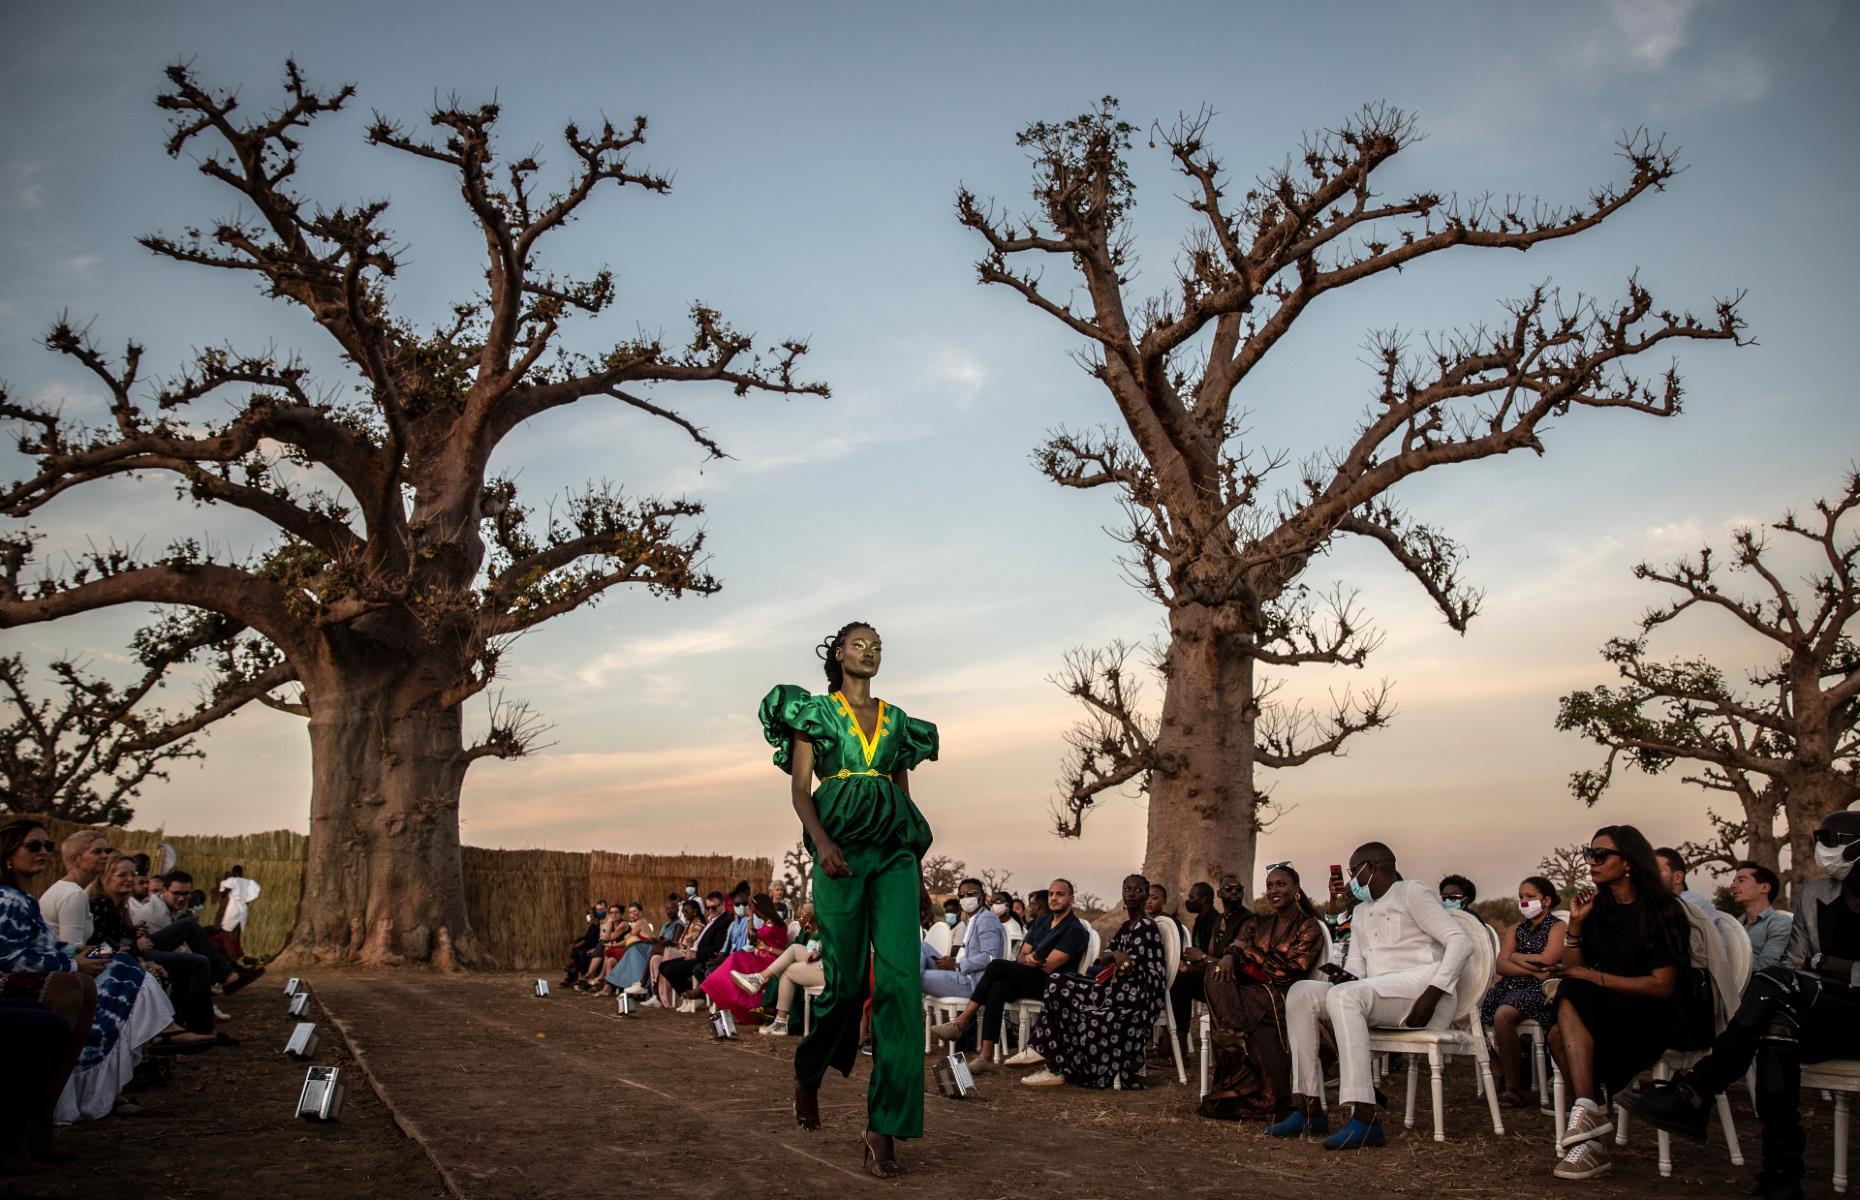 Dakar, Senegal: A fashion show with a difference